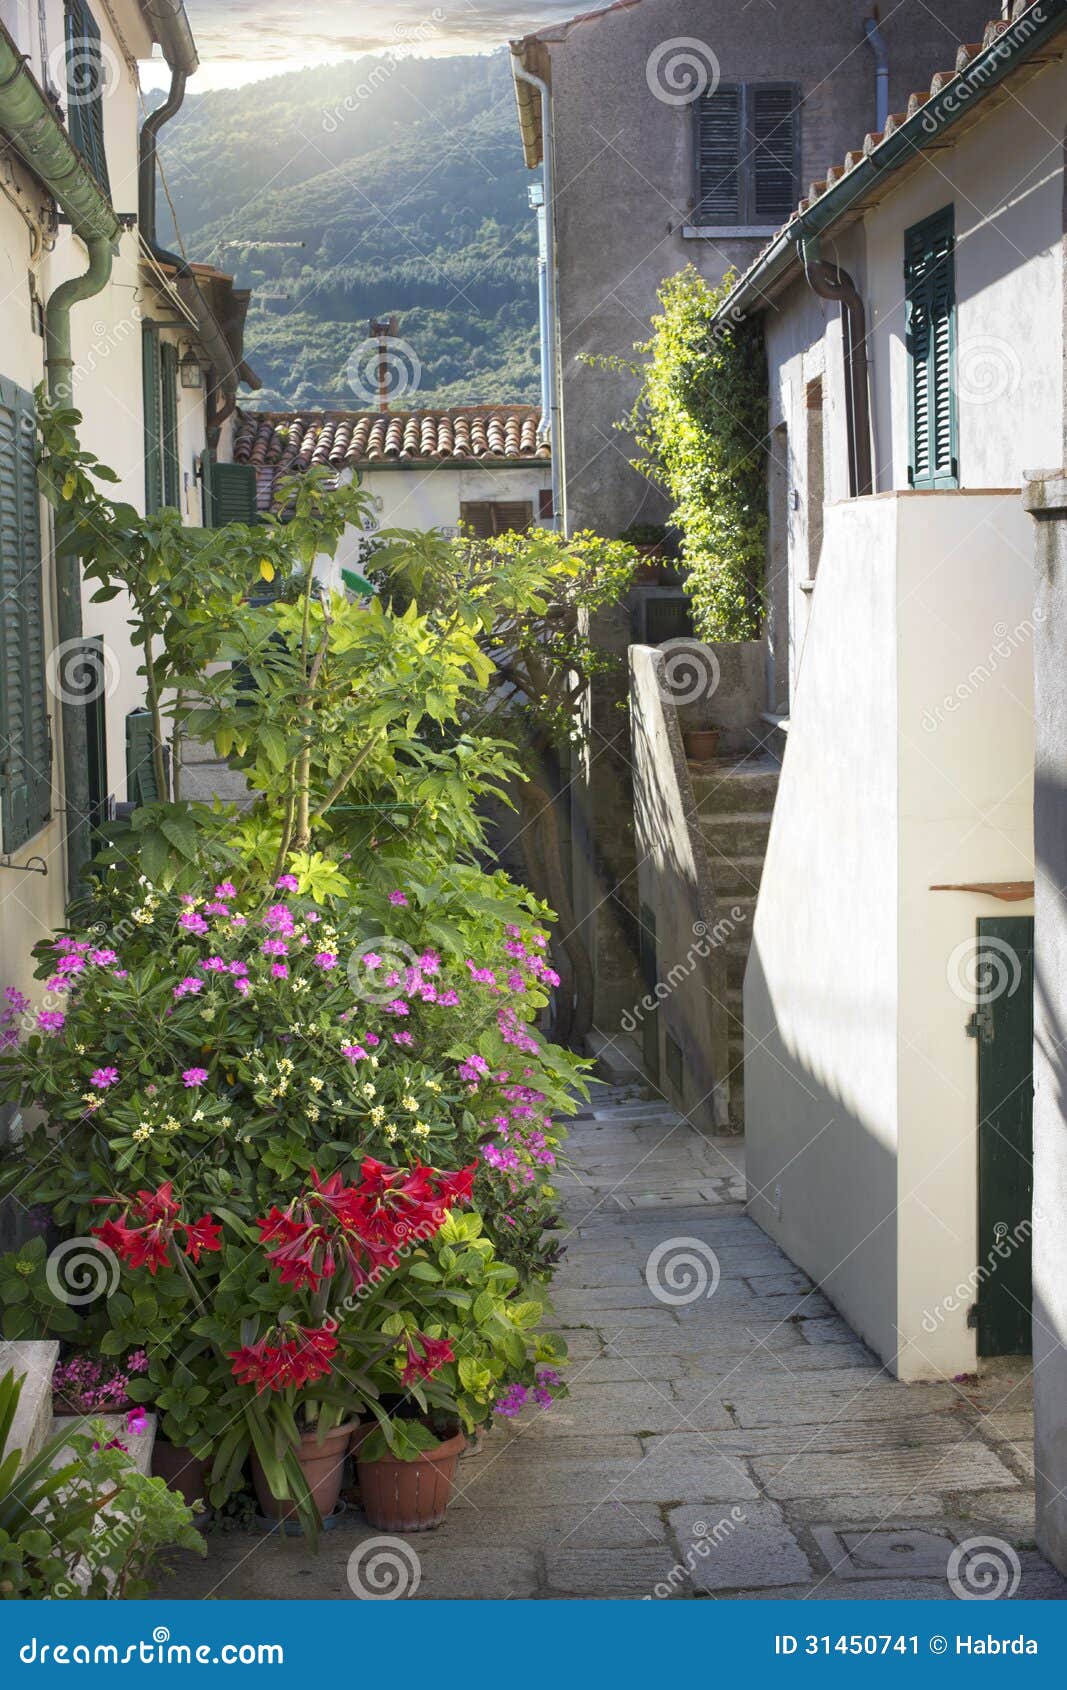 street in marciana town with flowering plants